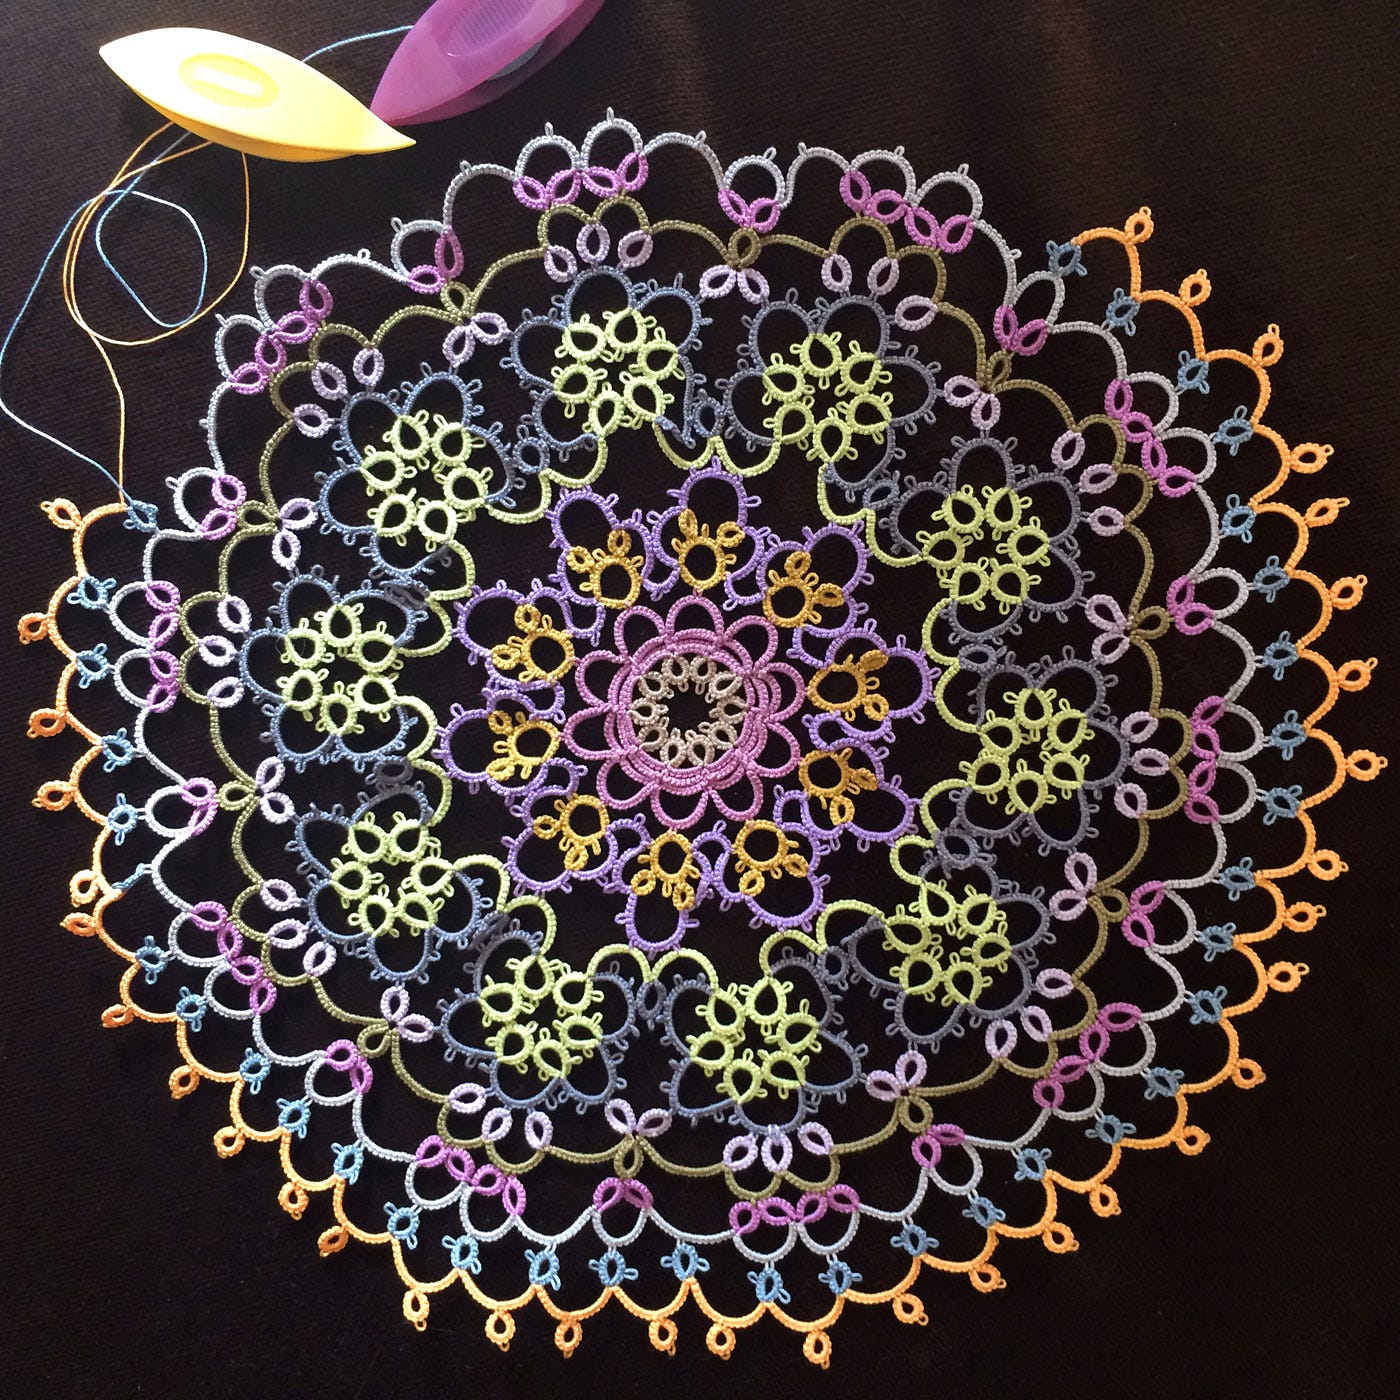 use doilies (or whatever else) at the projector for tracing. Sooo pretty!